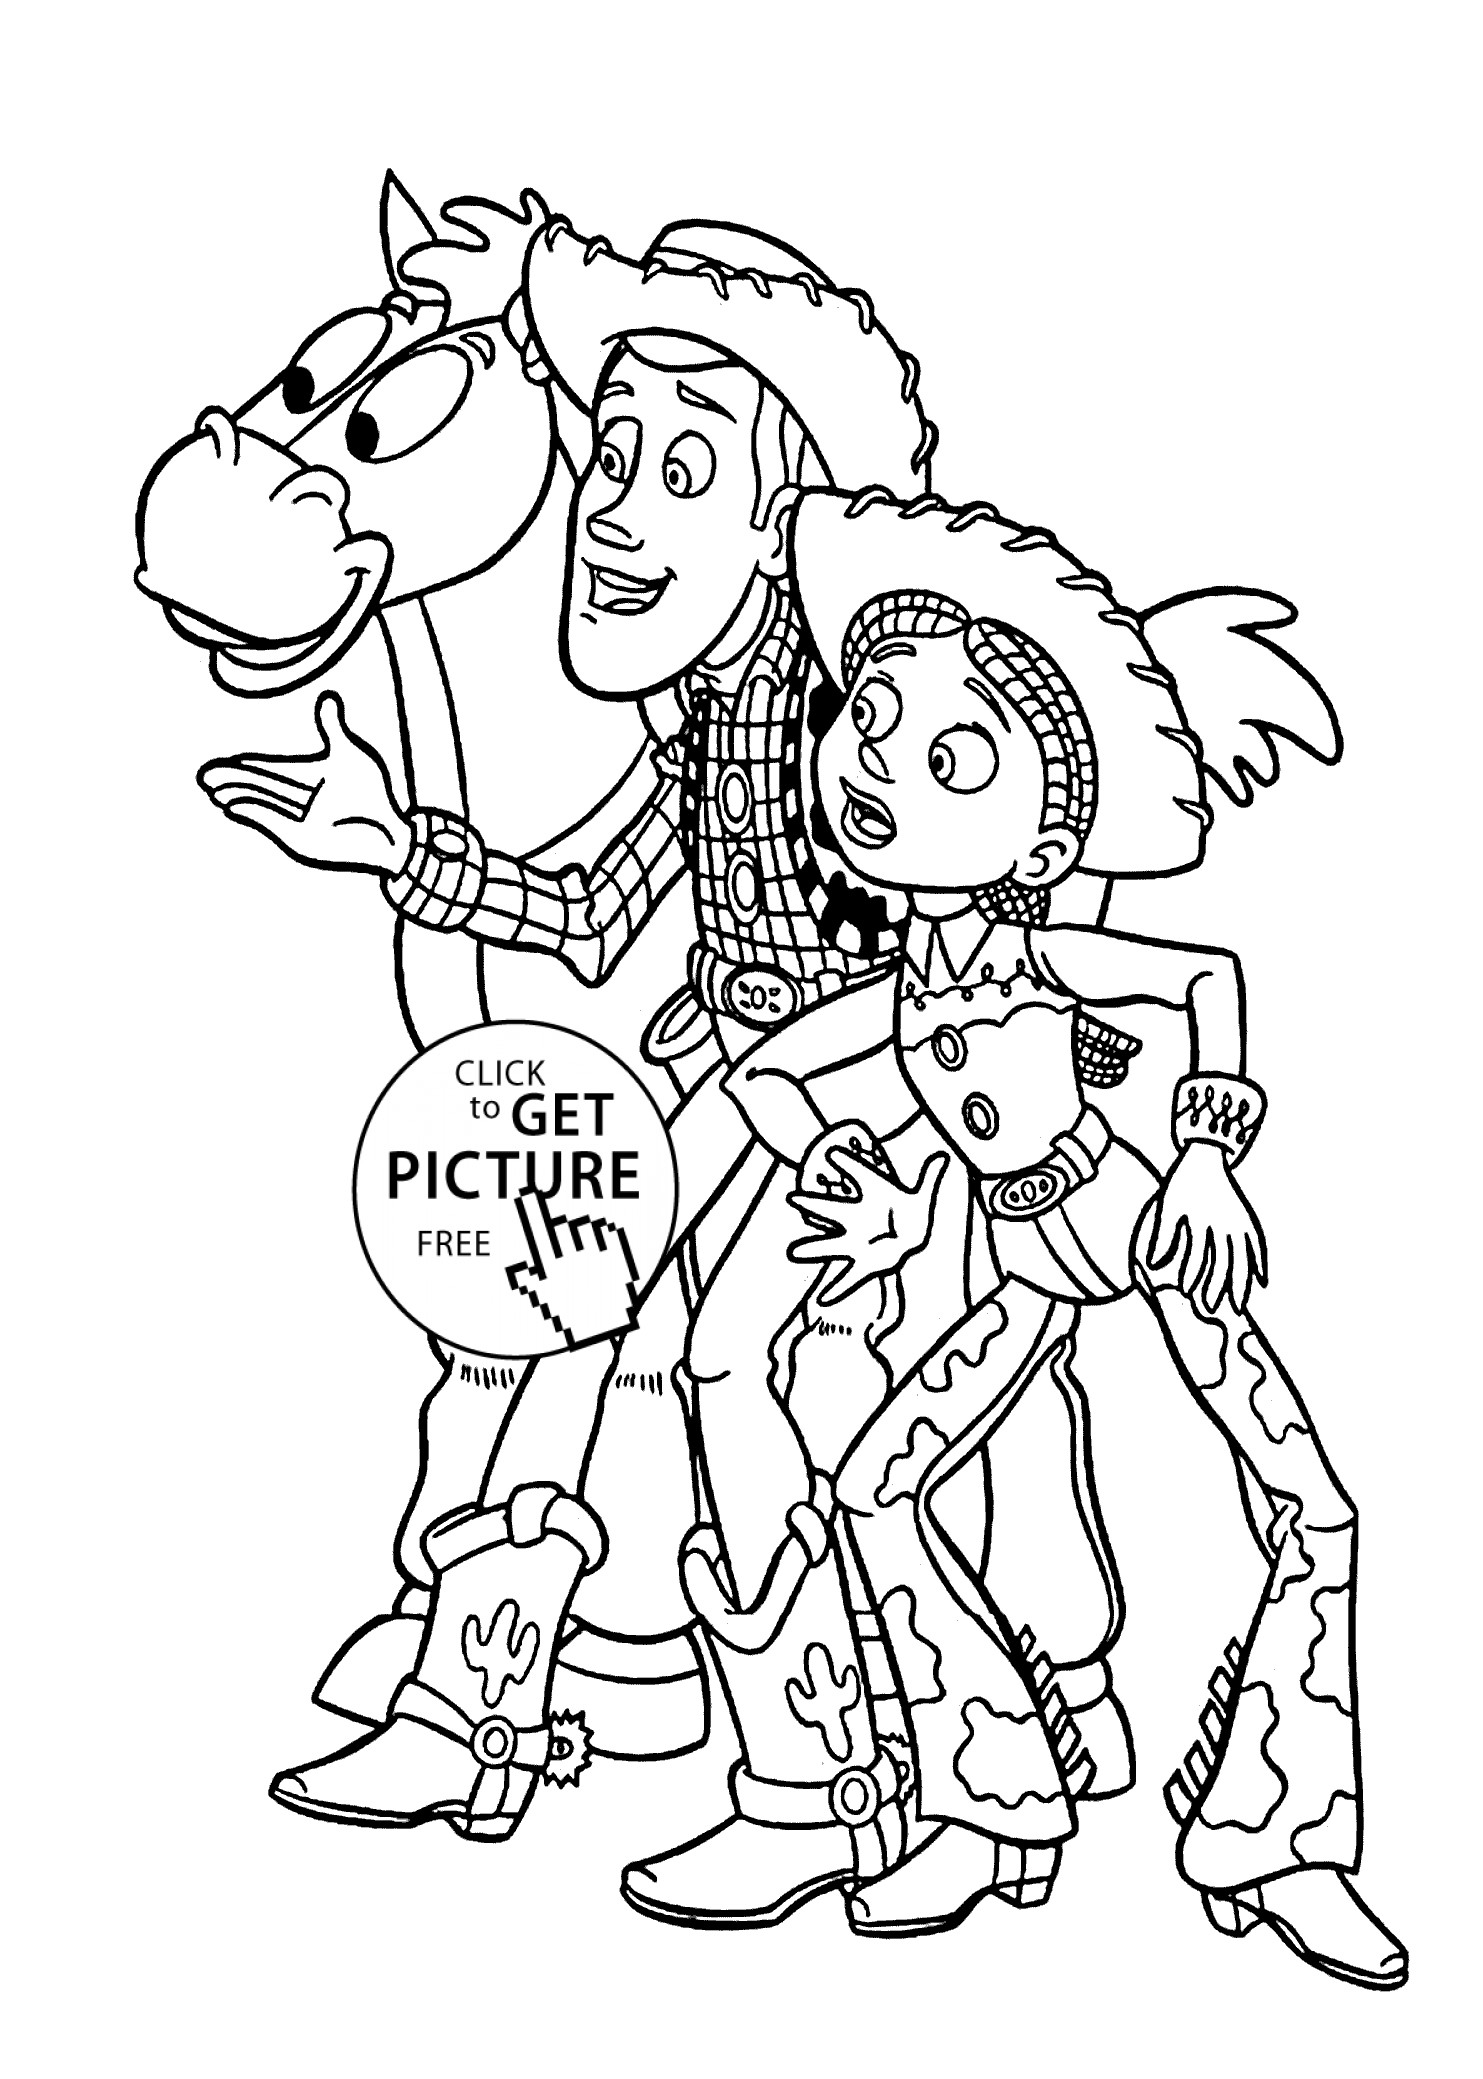 Jessie Coloring Pages
 Cowboys from Toy story coloring pages for kids printable